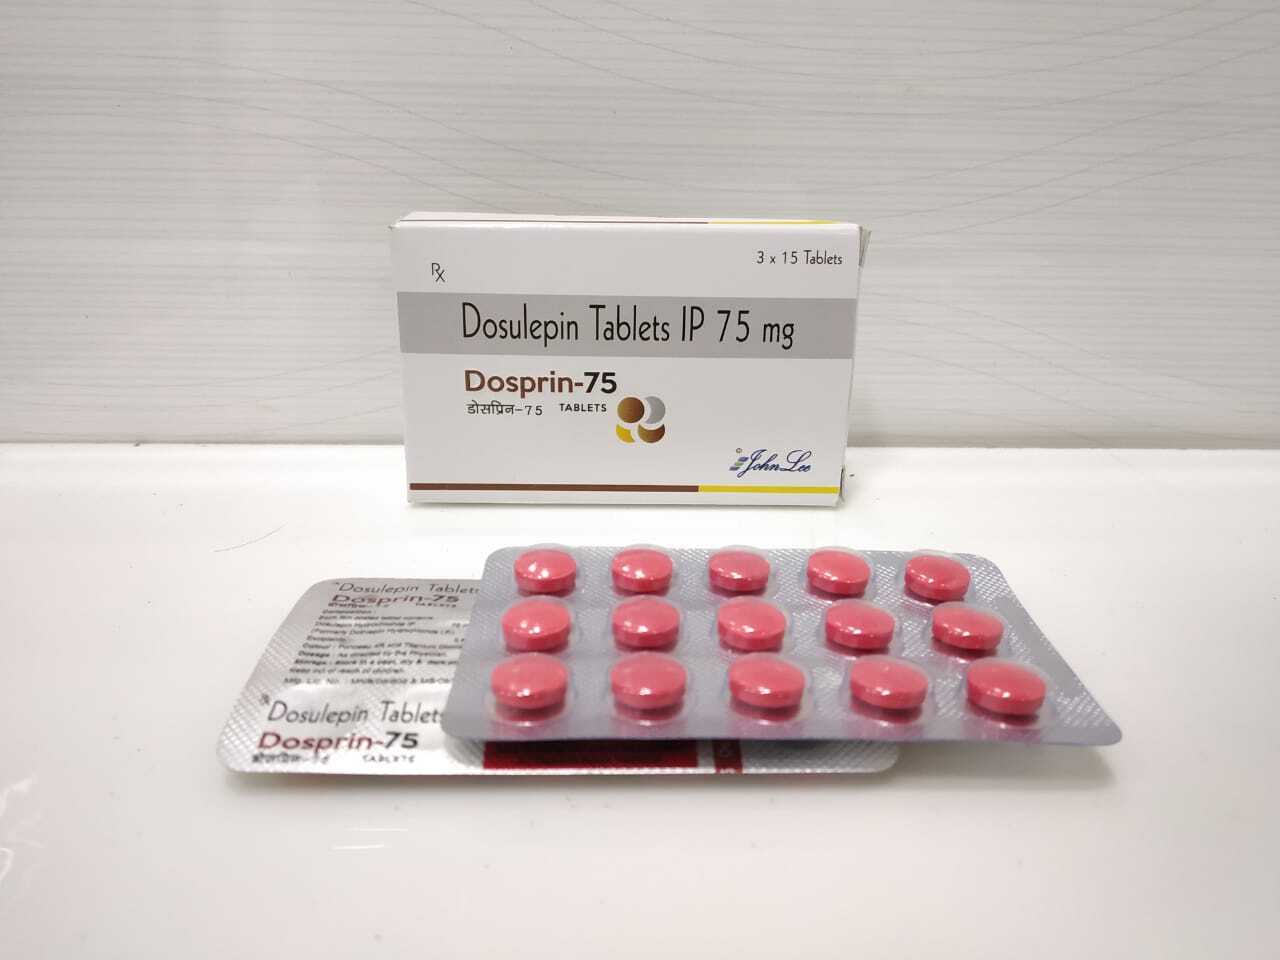 Dosulepin Tablets